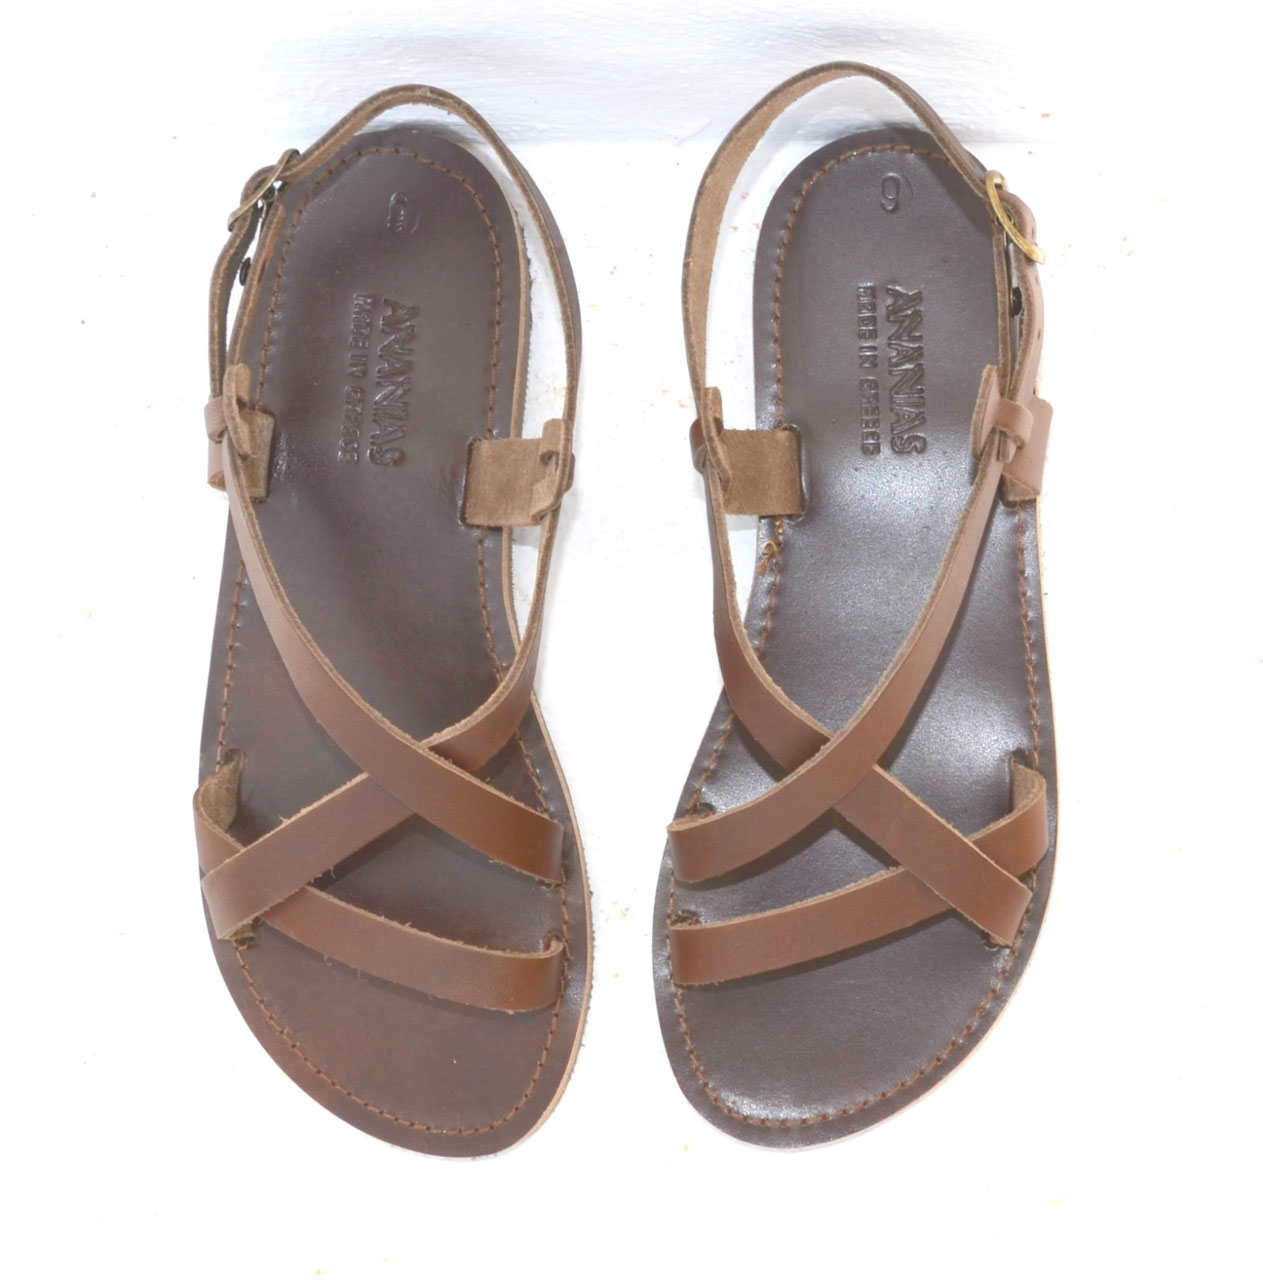 strappy leather sandals - Ananias Sandals